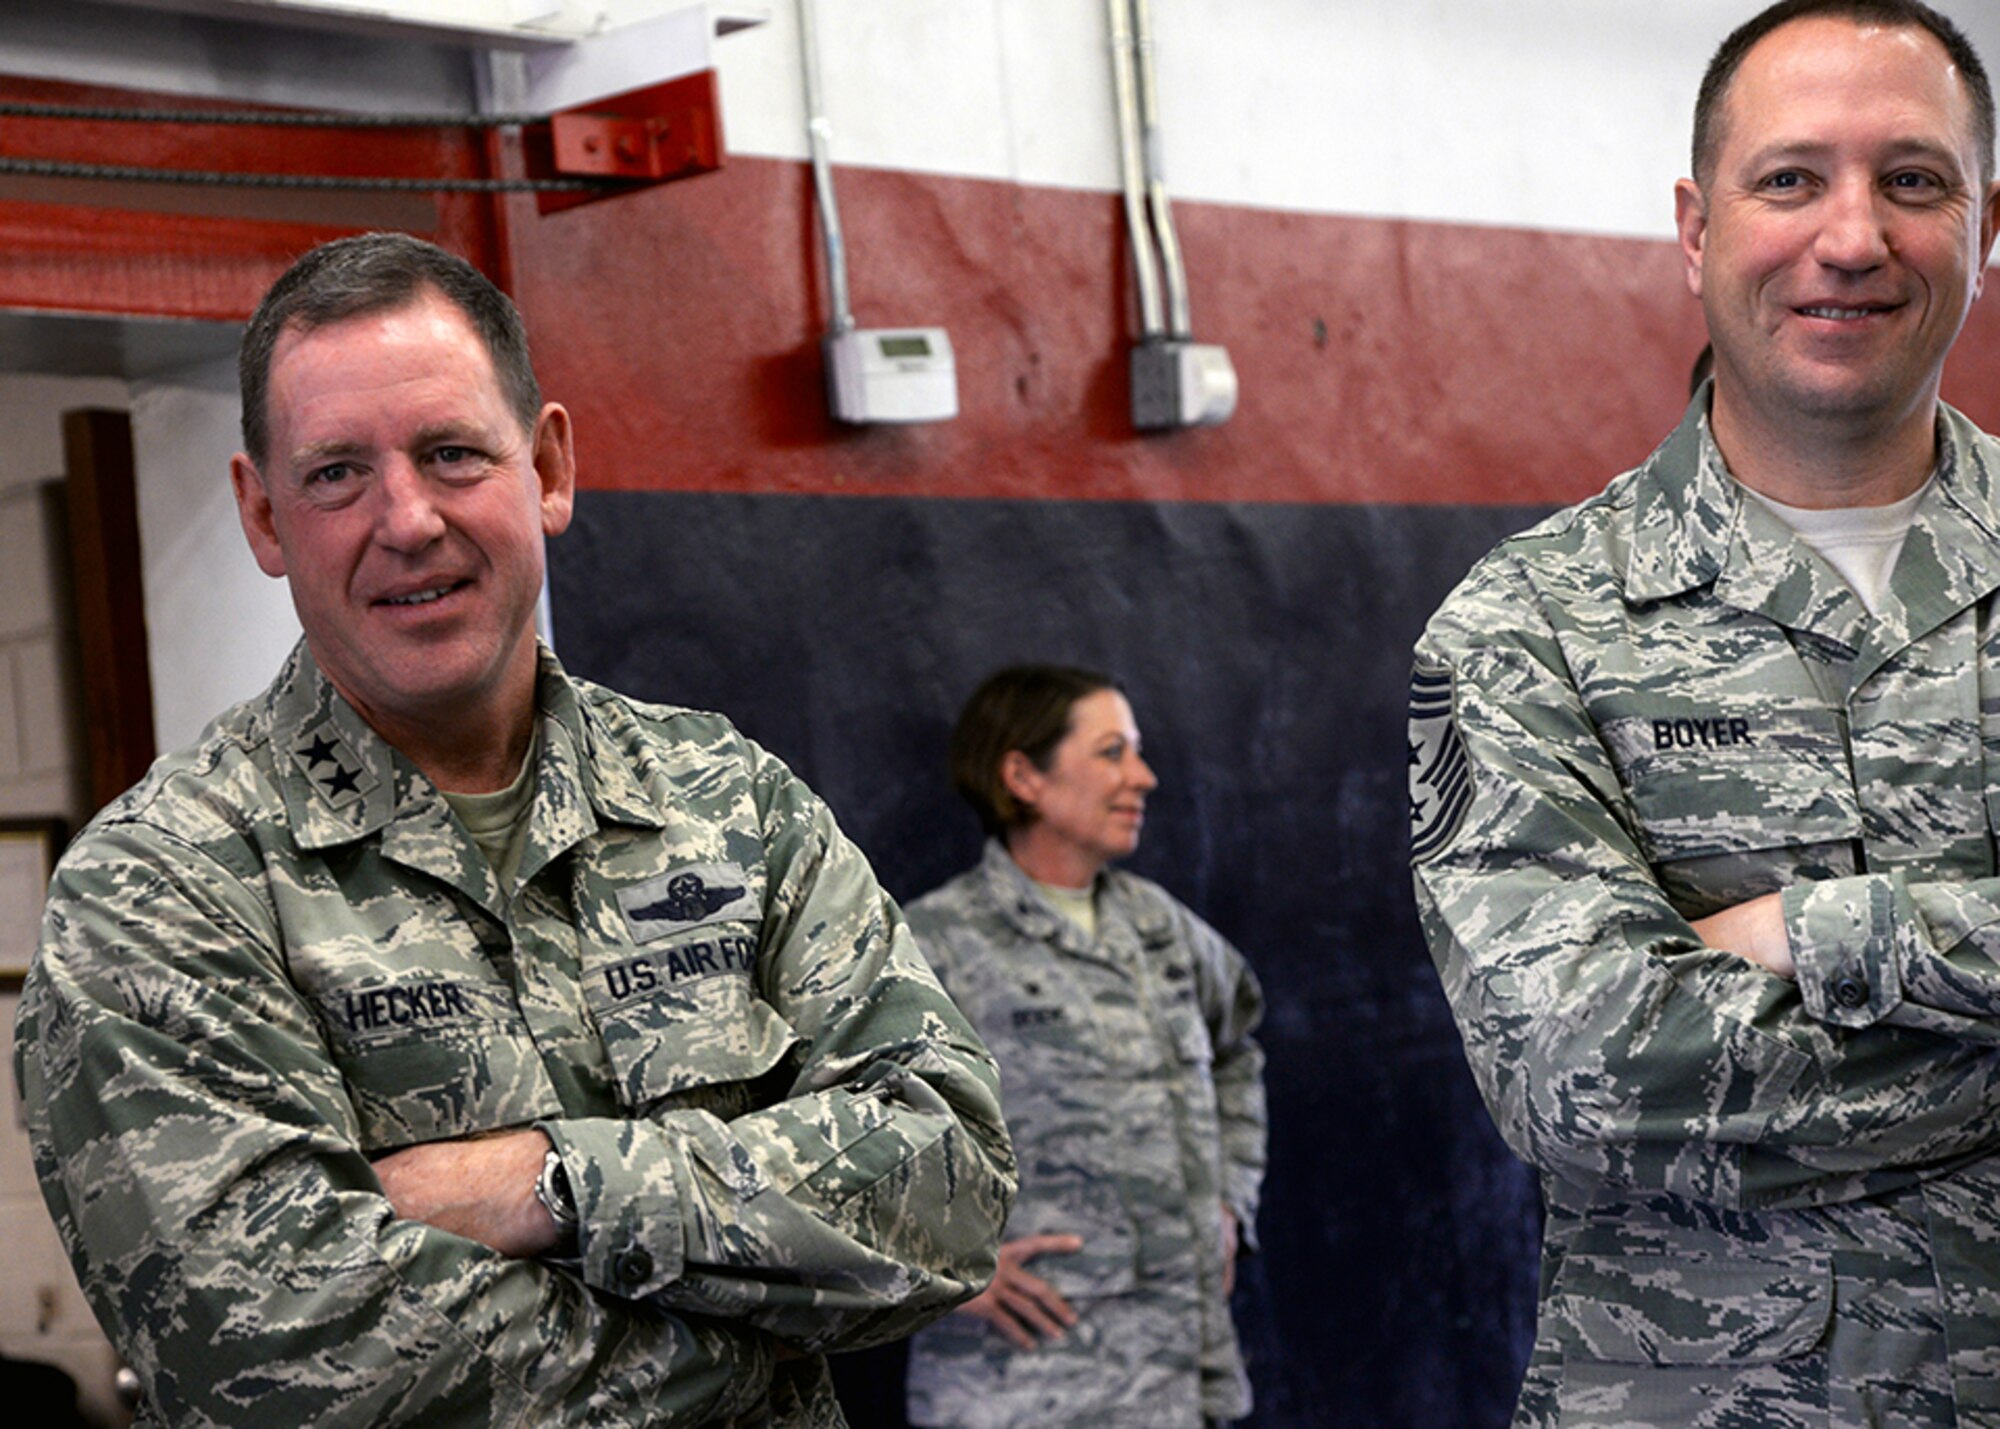 Maj. Gen. James Hecker, 19th Air Force commander, and Chief Master Sgt. Robert Boyer, 19th Air Force command chief, tour the munitions storage area, Dec. 10, during their visit to Joint Base San Antonio-Lackland, Texas. Boyer accompanied the general on his site visit to the wing. During the visit, both Air Force leaders, toured several units and reacquainted themselves with the people and mission of the 149th FW. 

